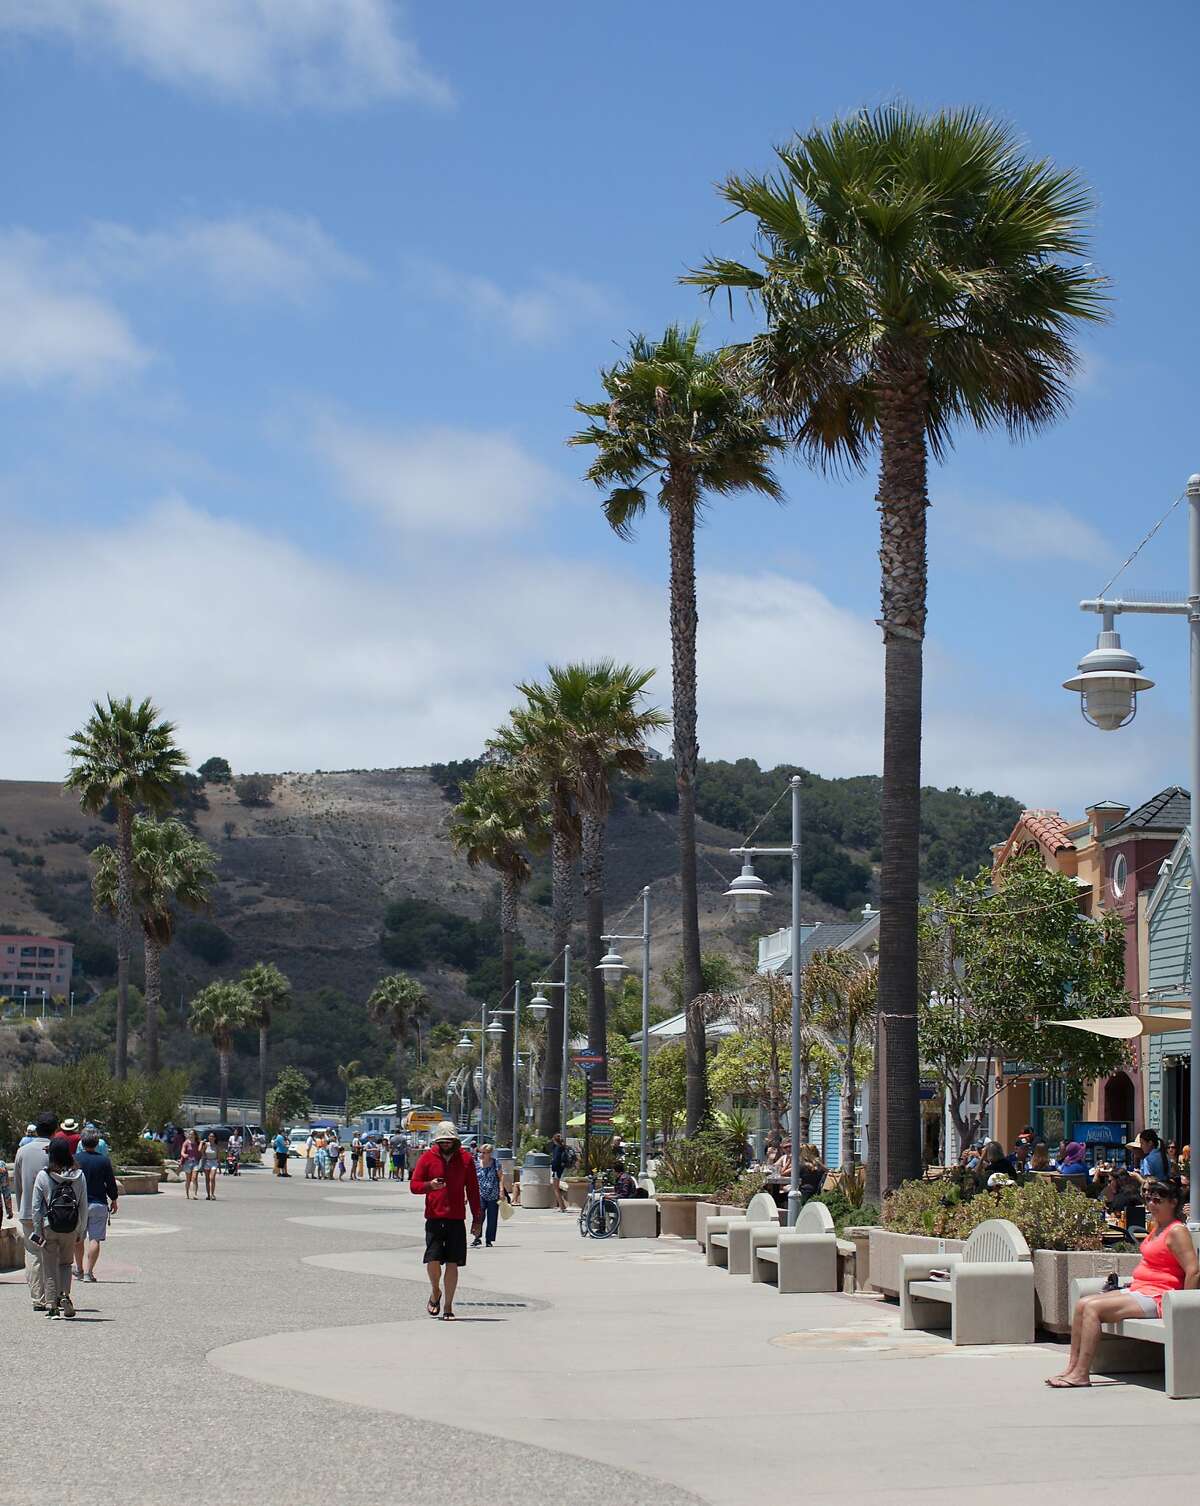 San Luis Obispo County: Which beach town suits your personality?